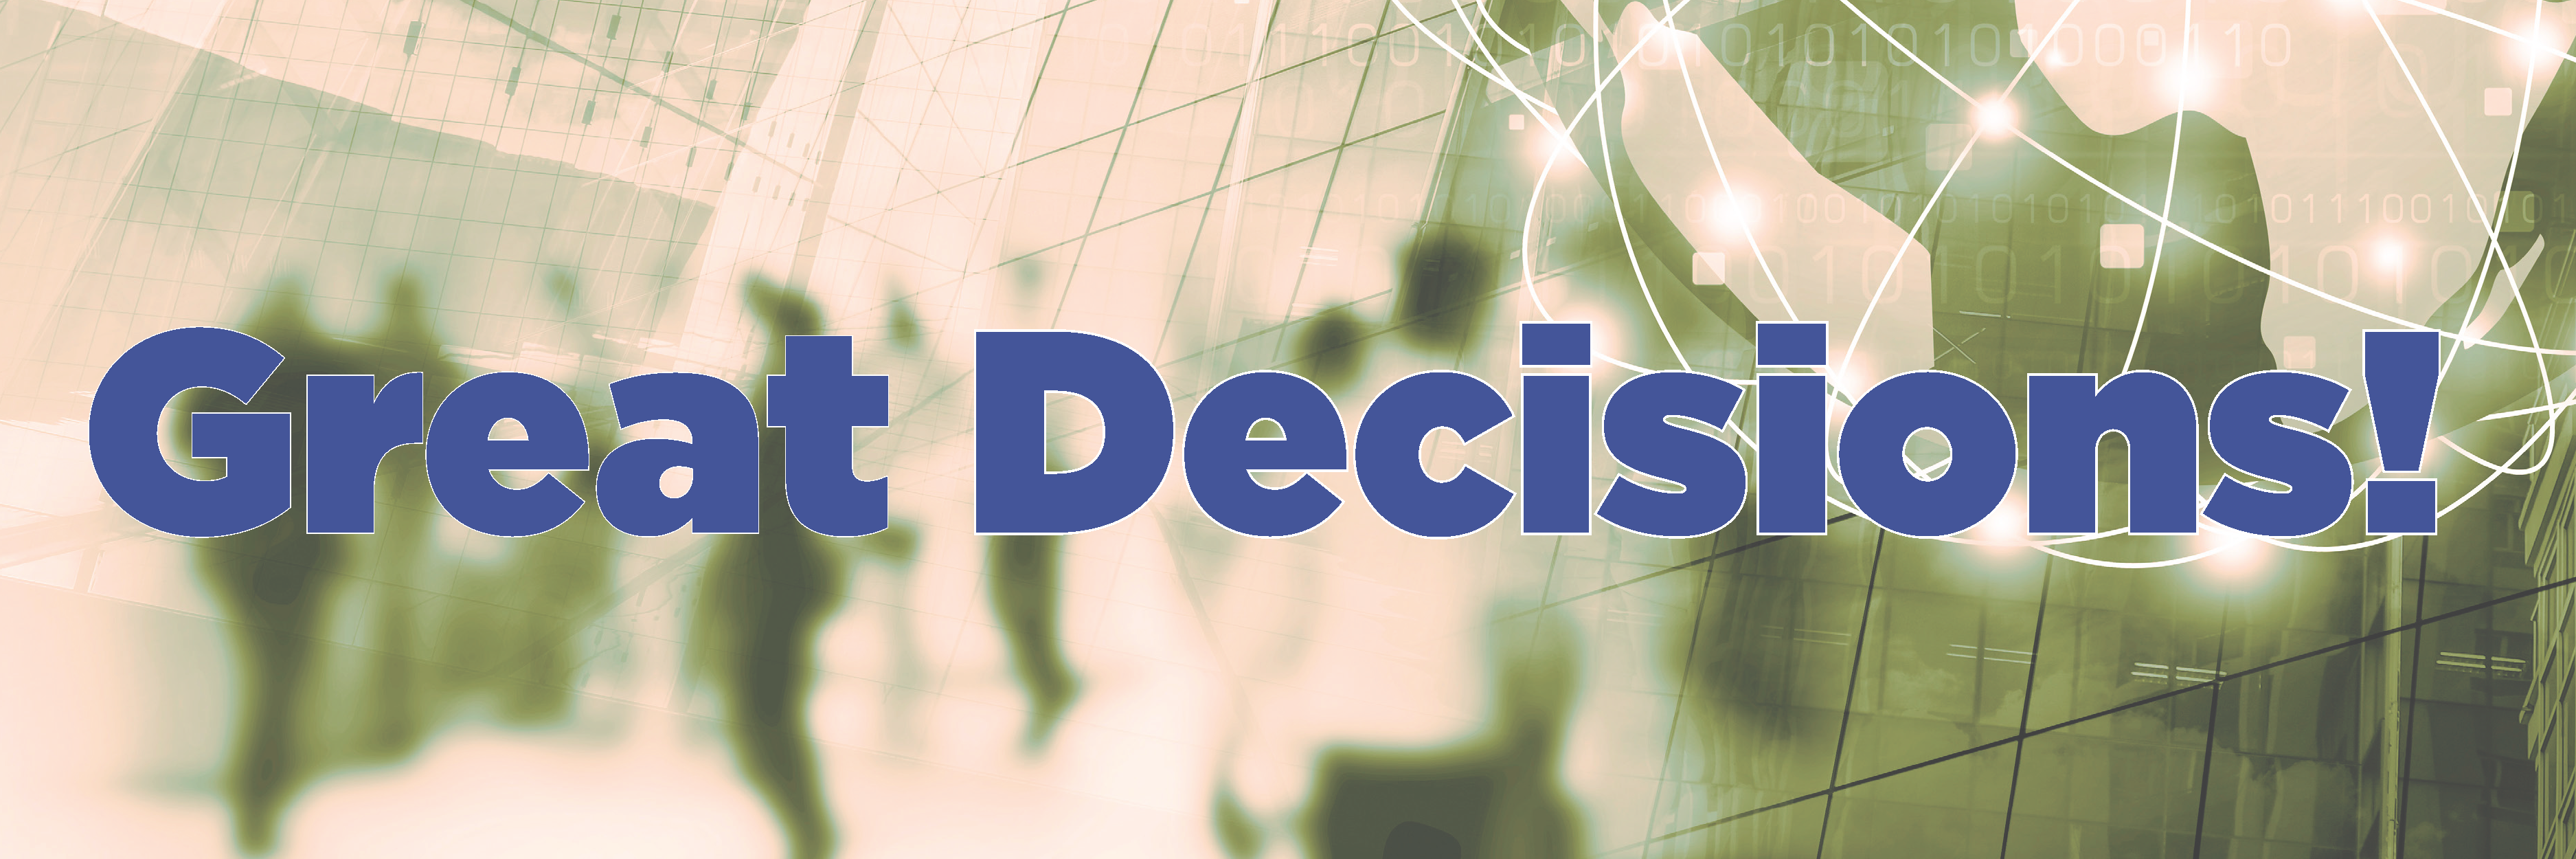 Great Decisions Campaign Graphic 